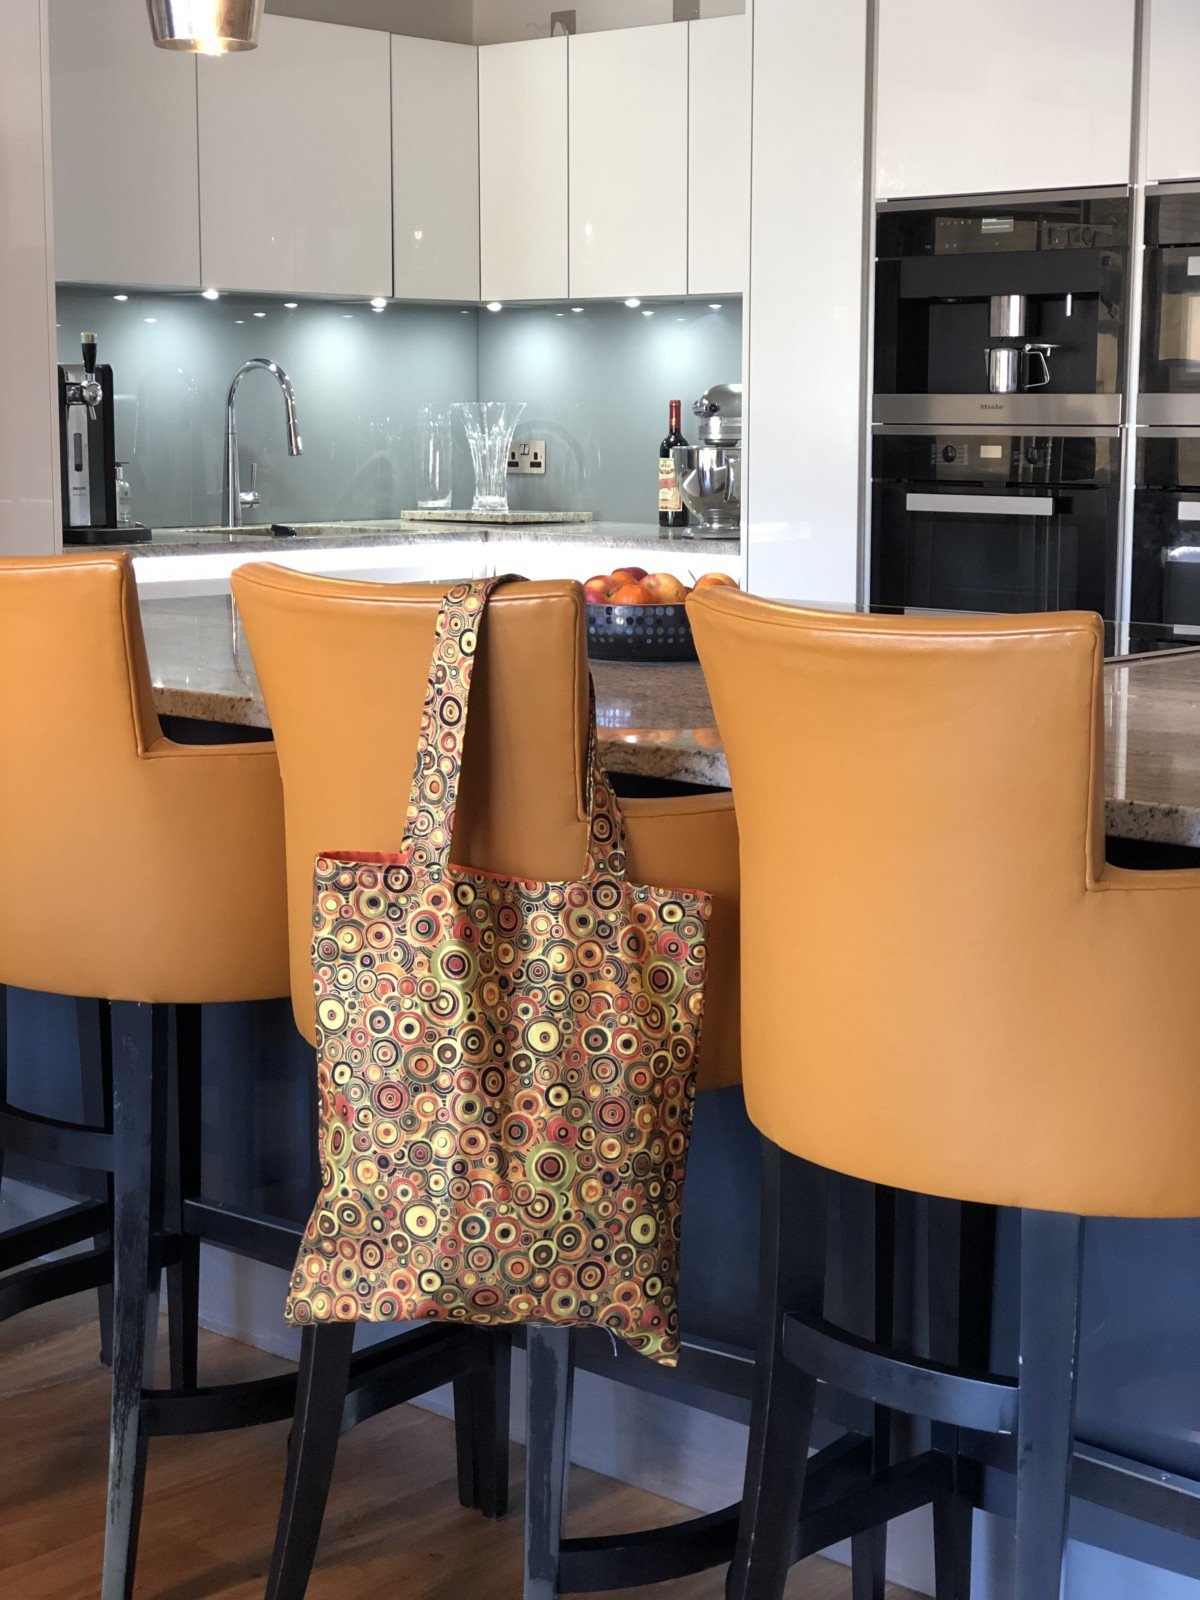 We also made a trendy tote bag to carry it all home in. I love it sew much it even matches the kitchen! Home made tote bag made in Essex